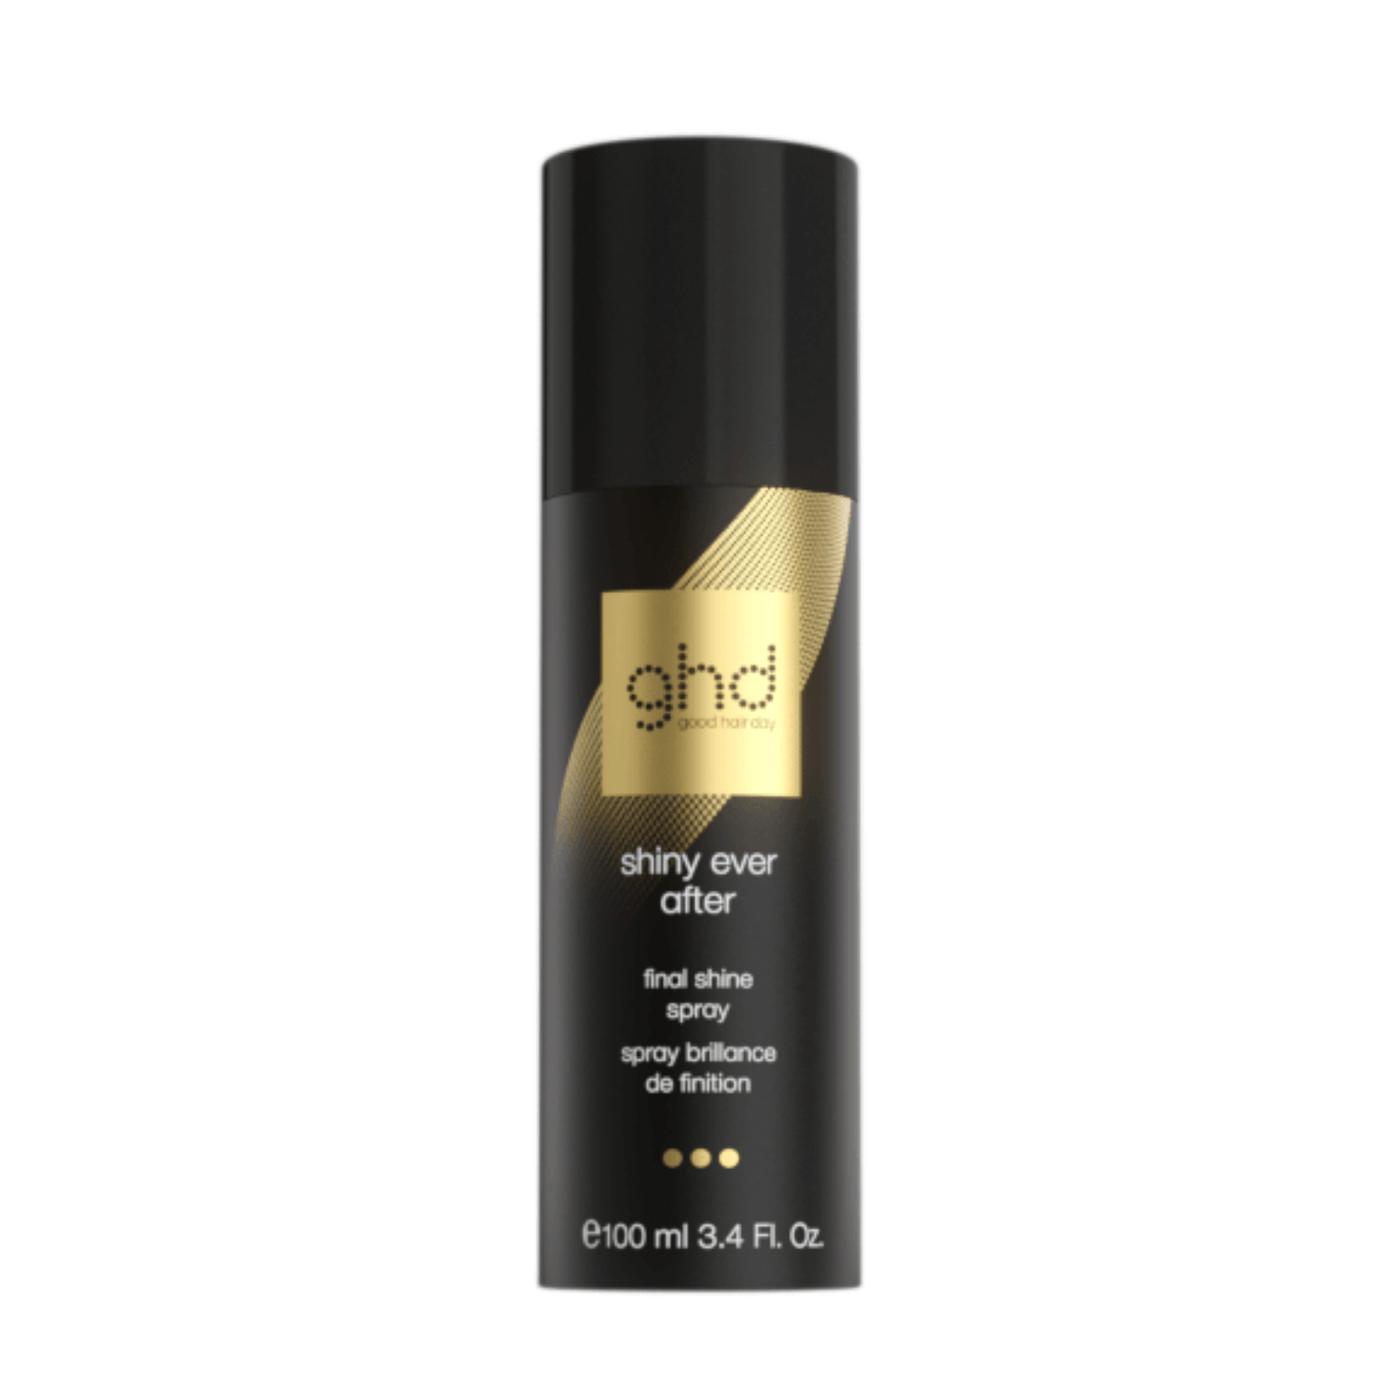 ghd Styling ghd shiny ever after - final shine spray 100ml